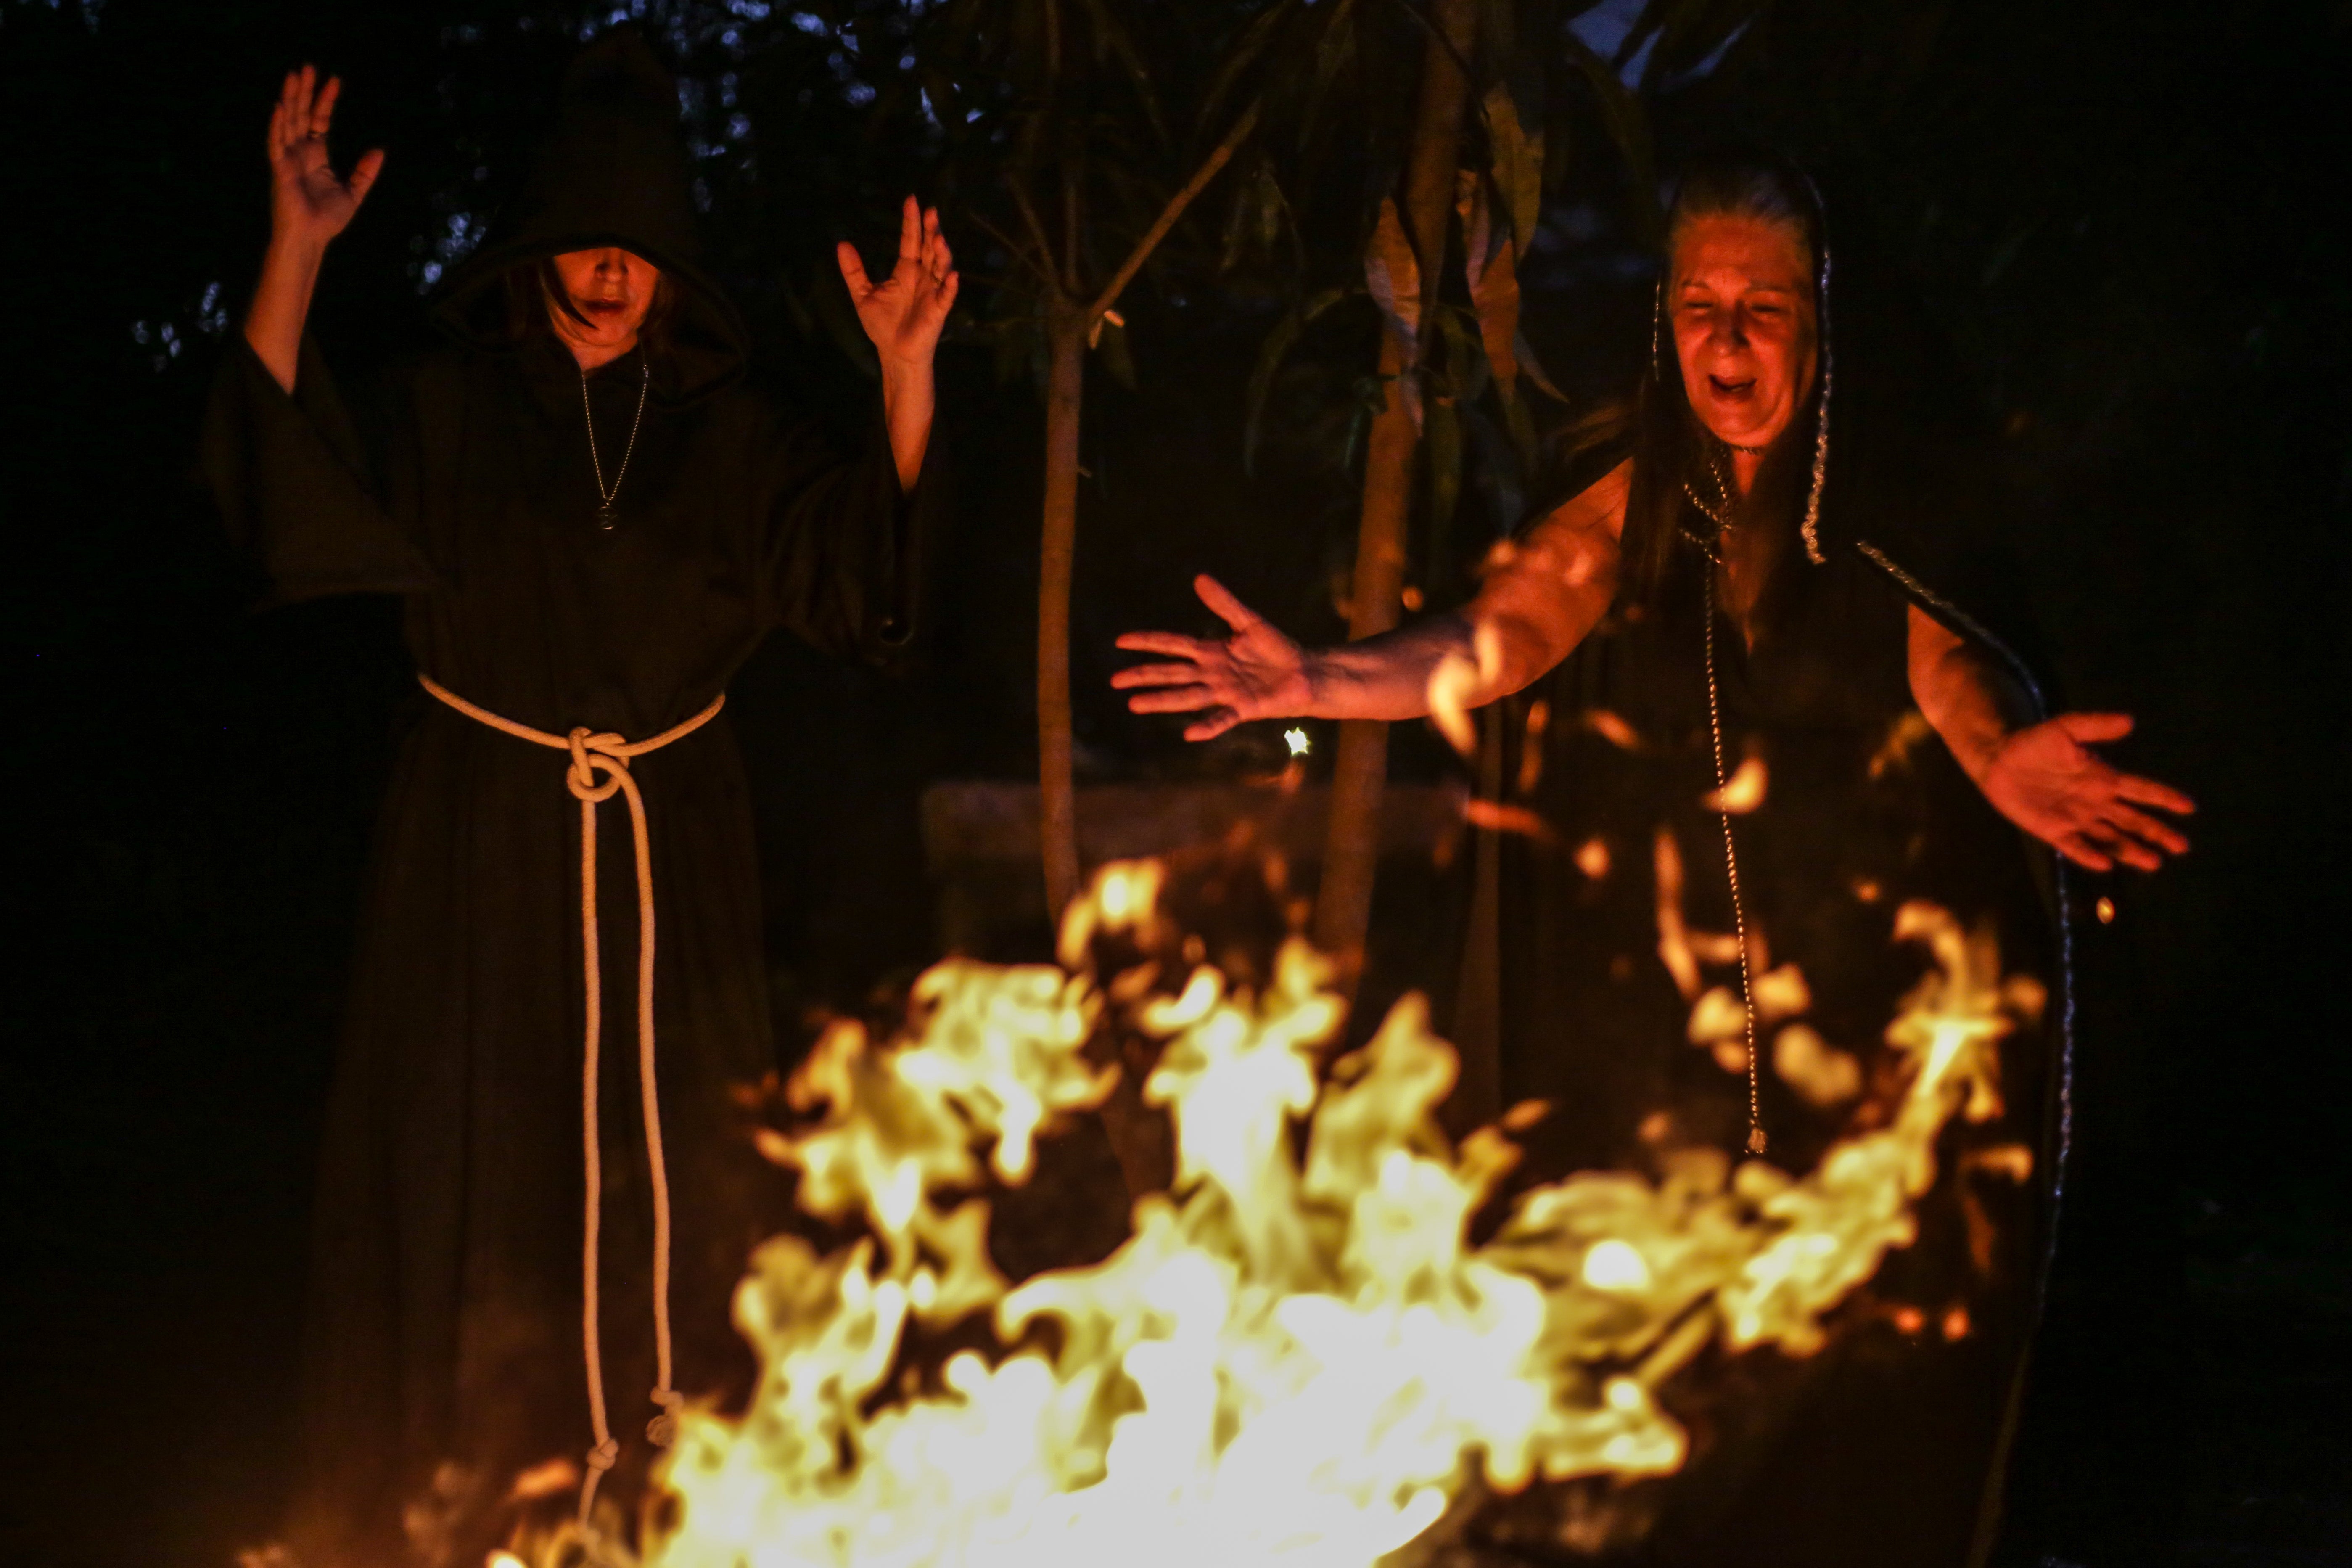 Wiccan priestesses pray around a fire pit during the Imbolc, one of the eight Sabbat festivals, the most important dates in a witch’s calendar